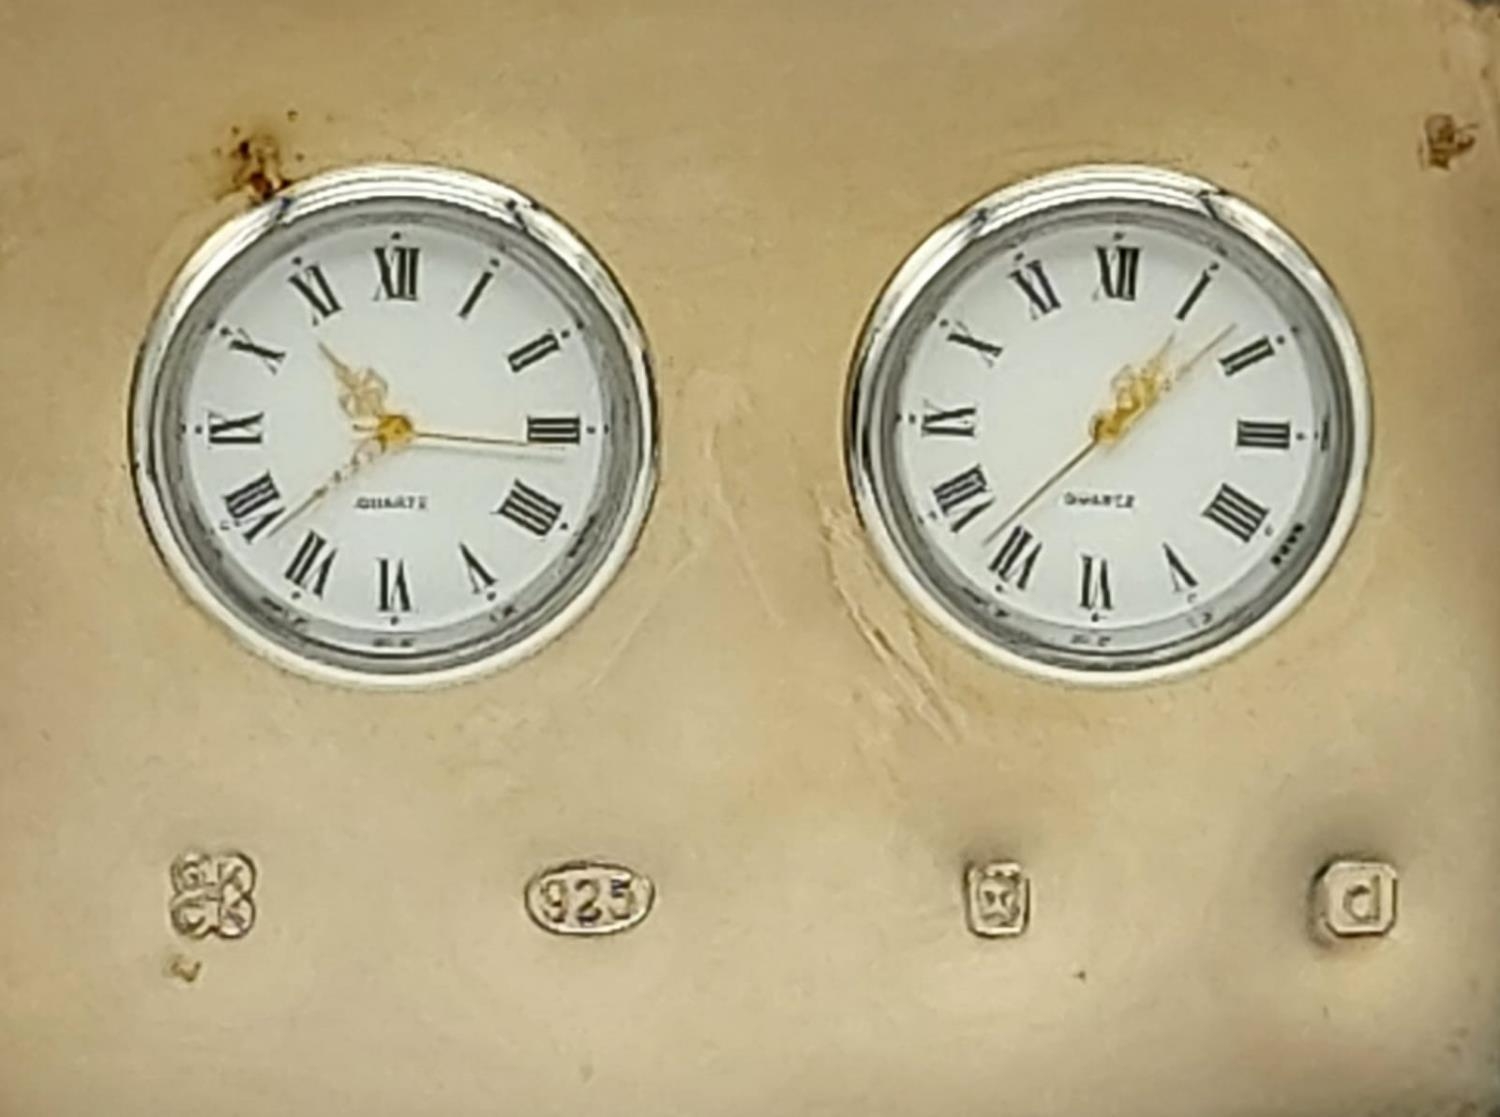 A Gordon and Christopher Kitney Sterling Silver Desk Clock. Two Dials. Quartz movement - needs - Image 3 of 5